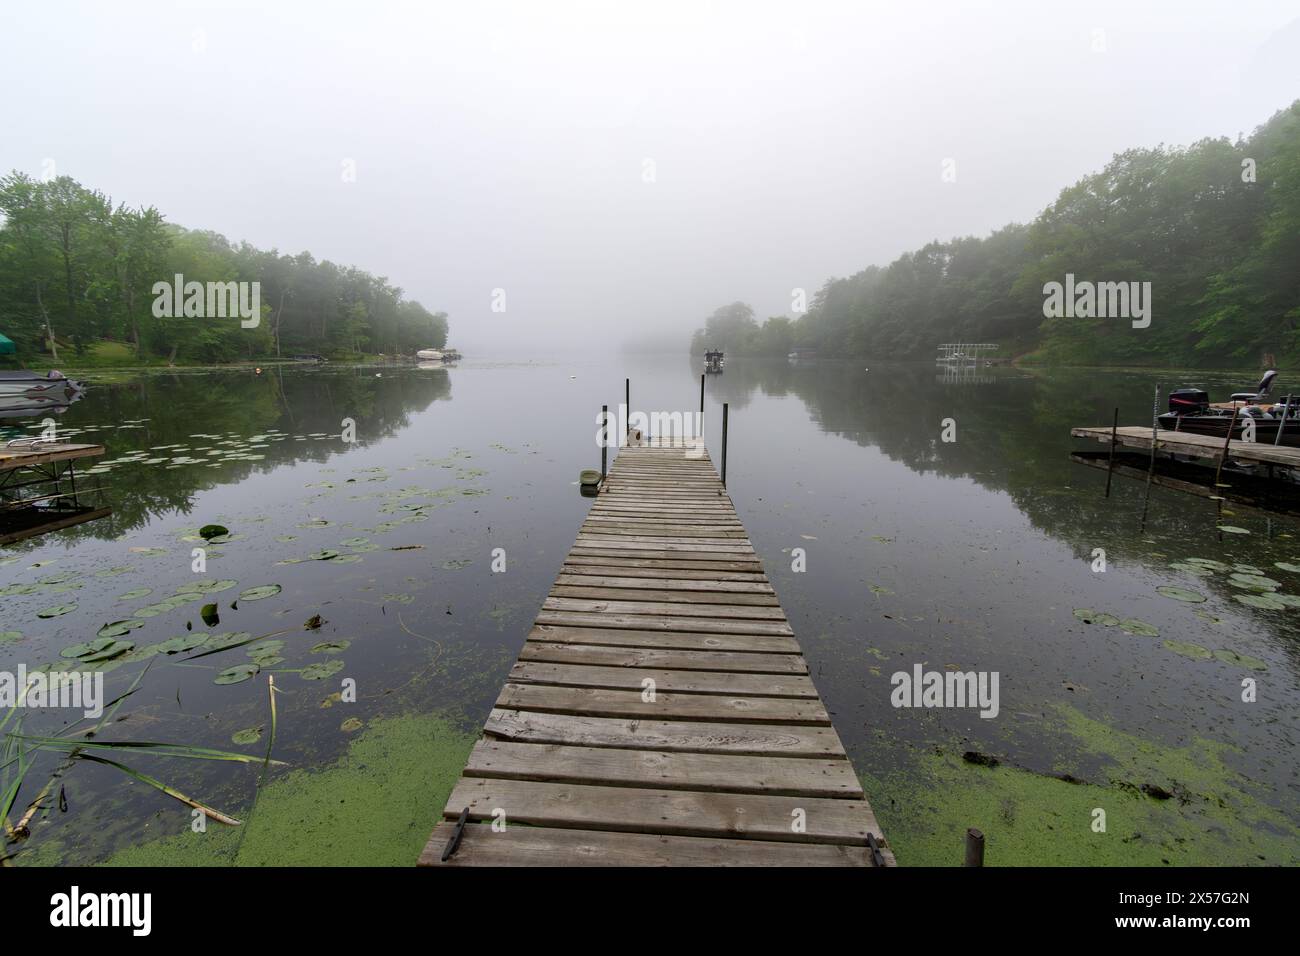 Looking down a pier on a calm Wisconsin lake on a foggy morning.  Fishing boat in distance. Stock Photo